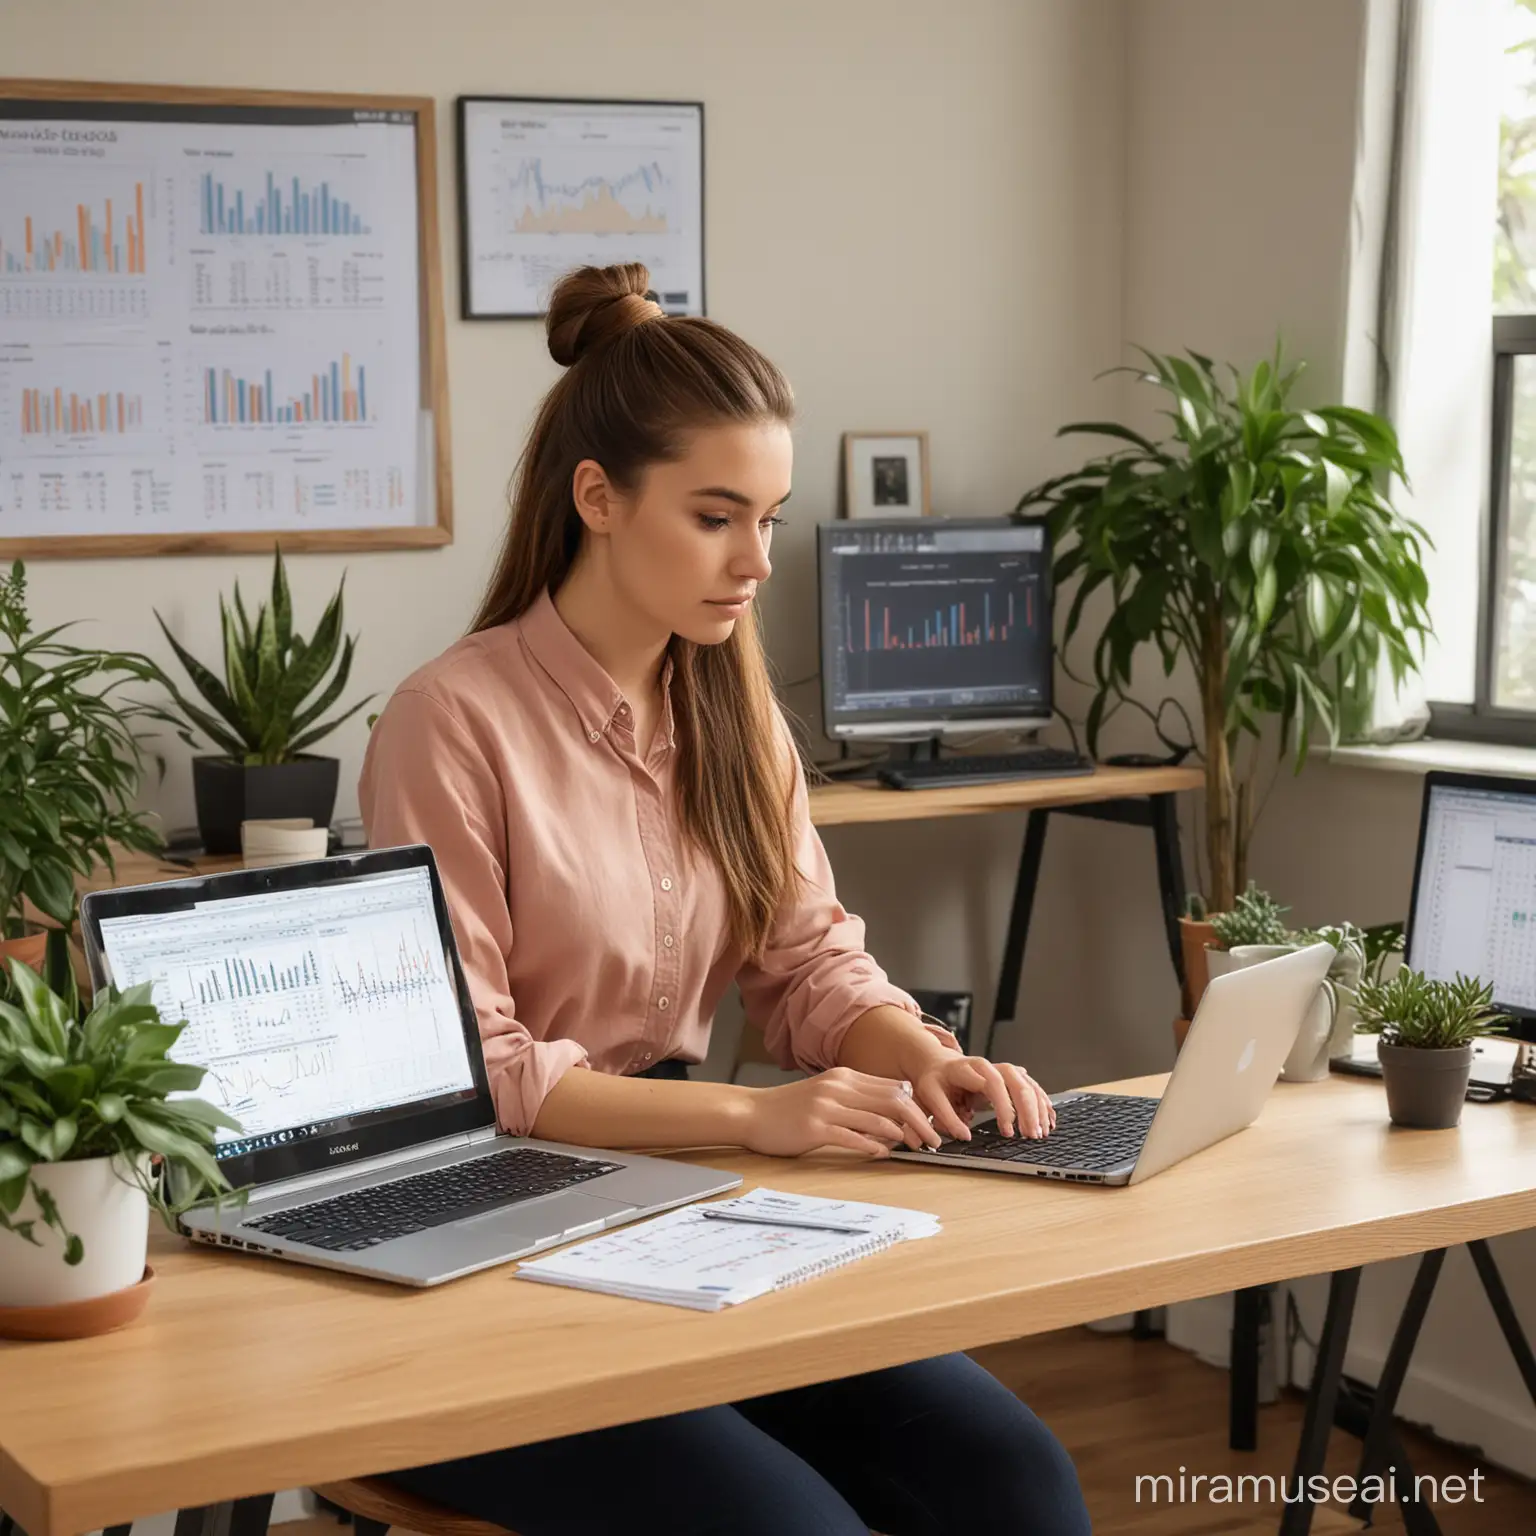 Focused Woman Working at Desk with Dual Monitors and Charts